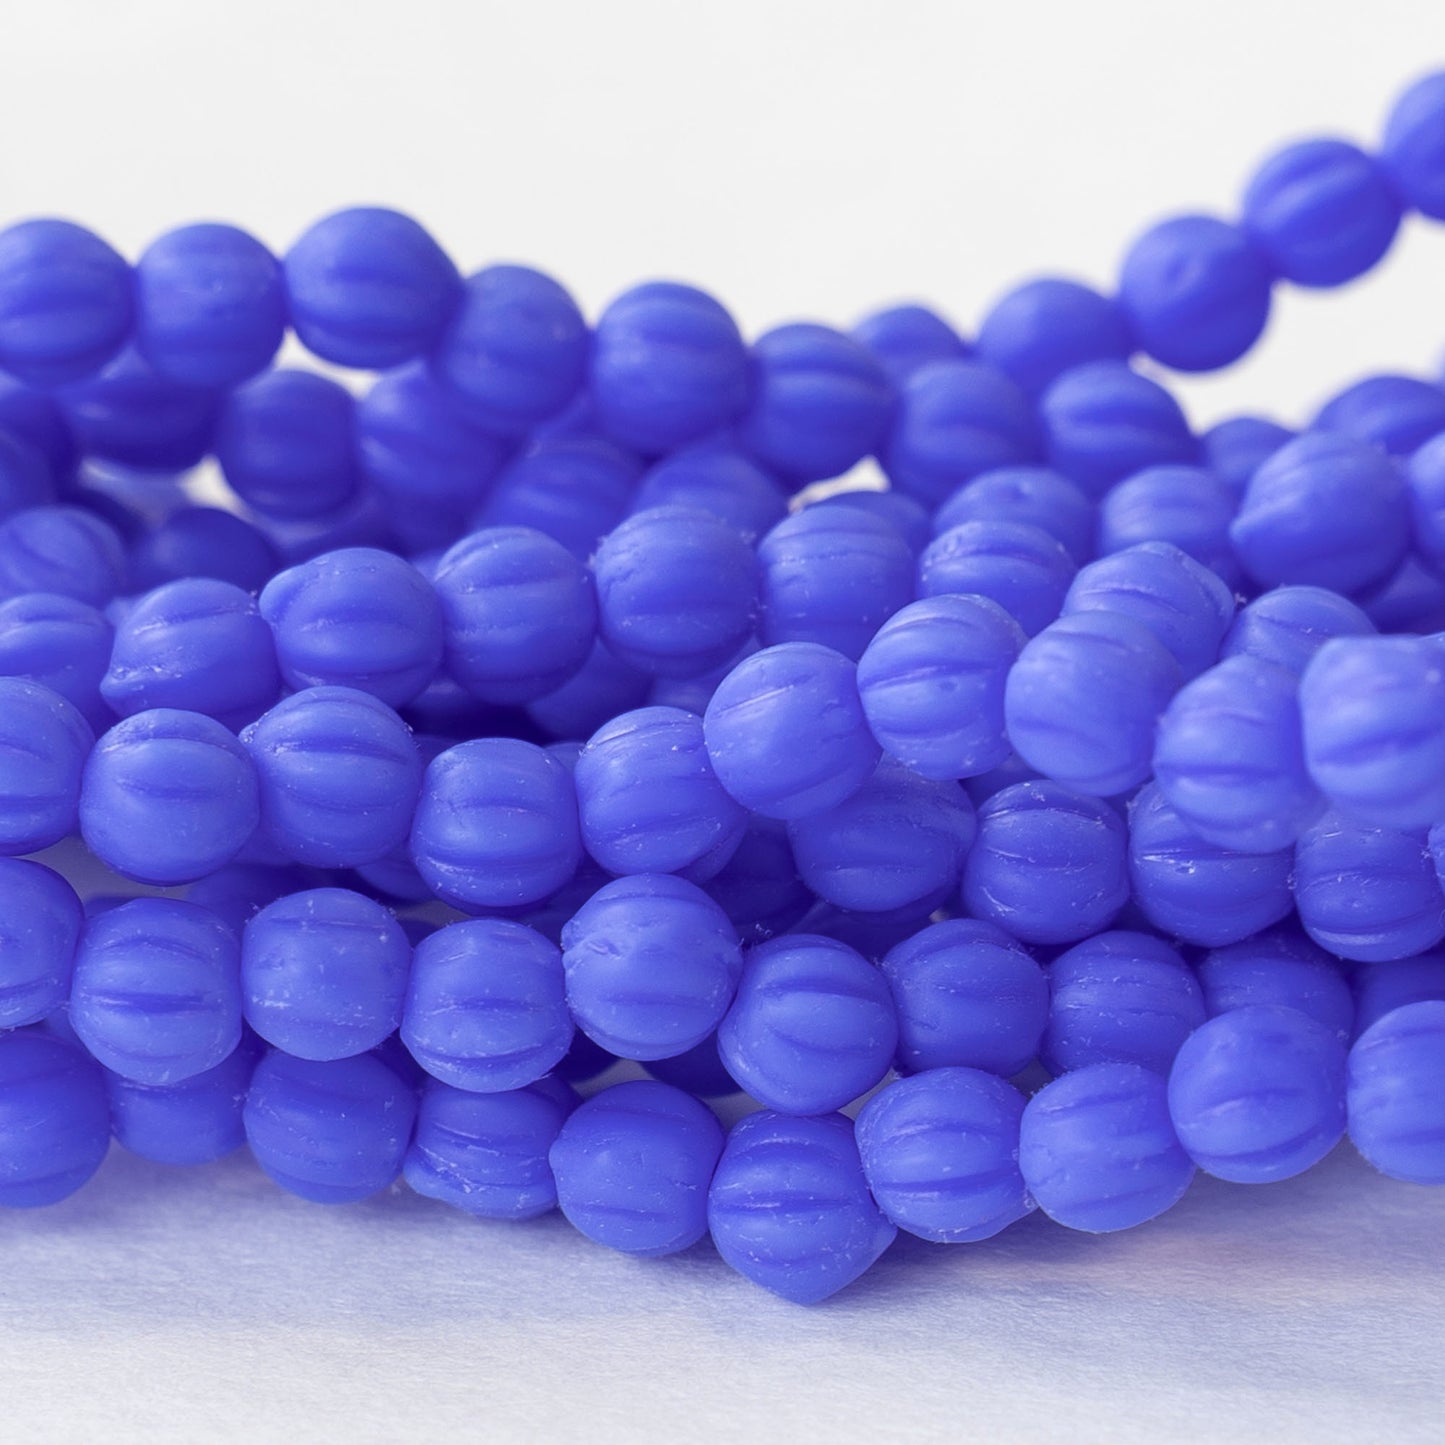 4mm Melon Beads - Opaque Periwinkle Blue - 58 Beads